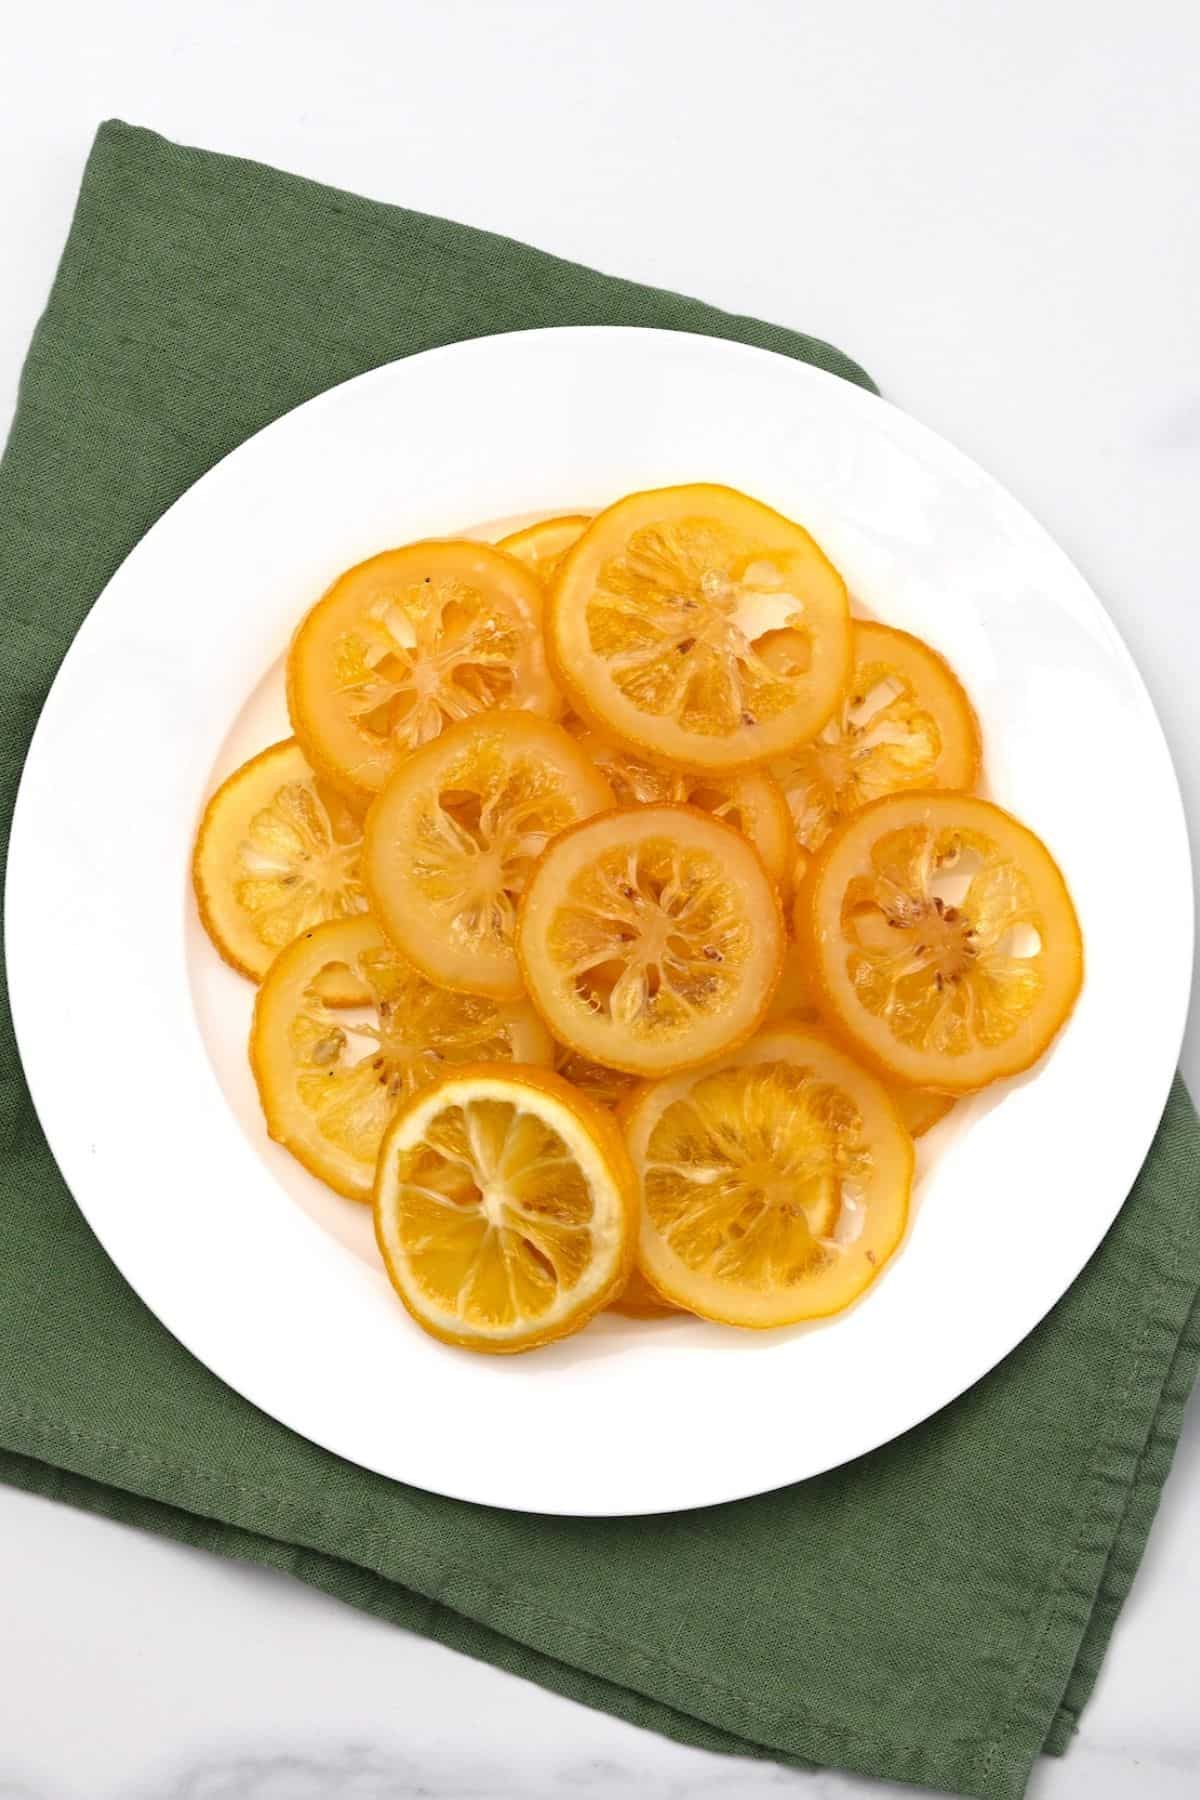 Homemade candied lemon slices arranged on a plate